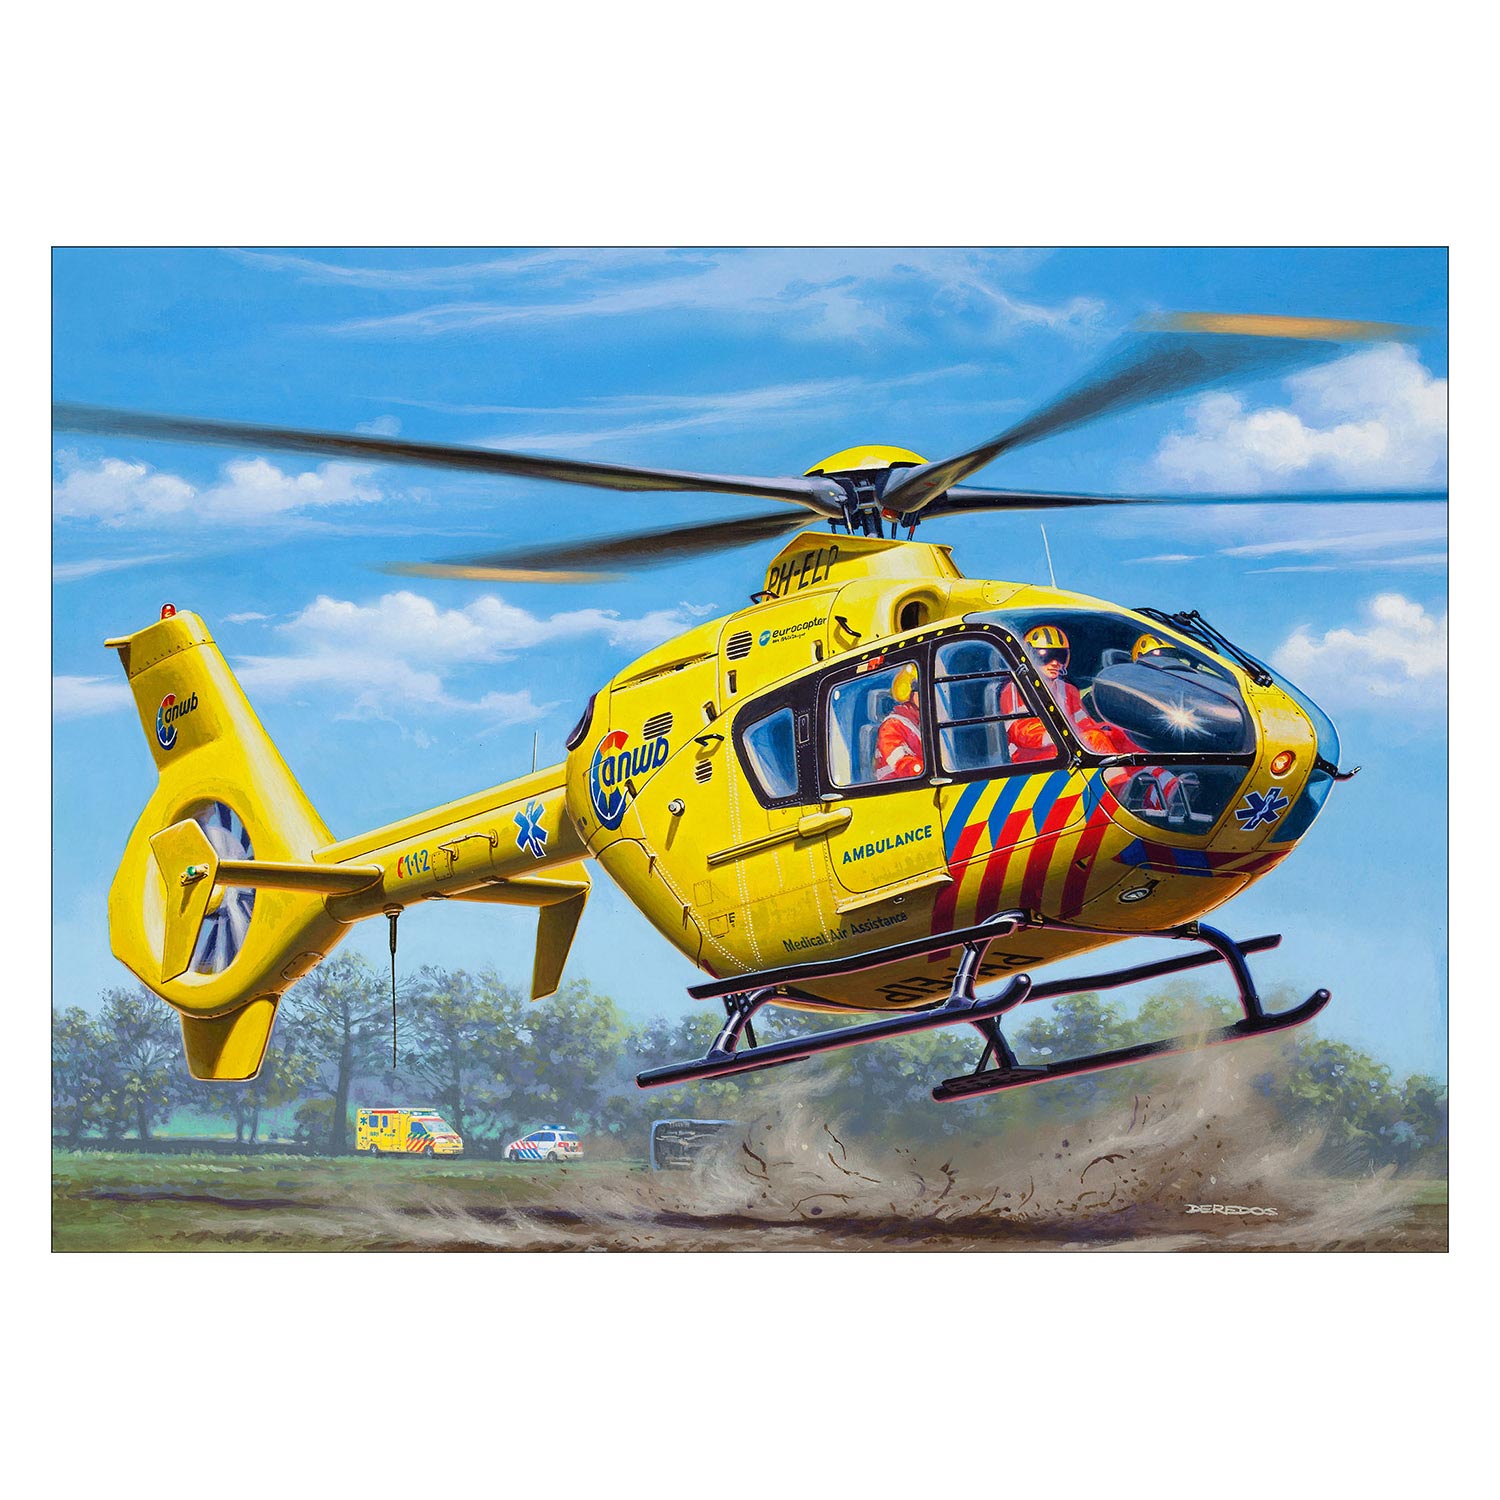 Revell Airbus Helikopter EC135 ANWB